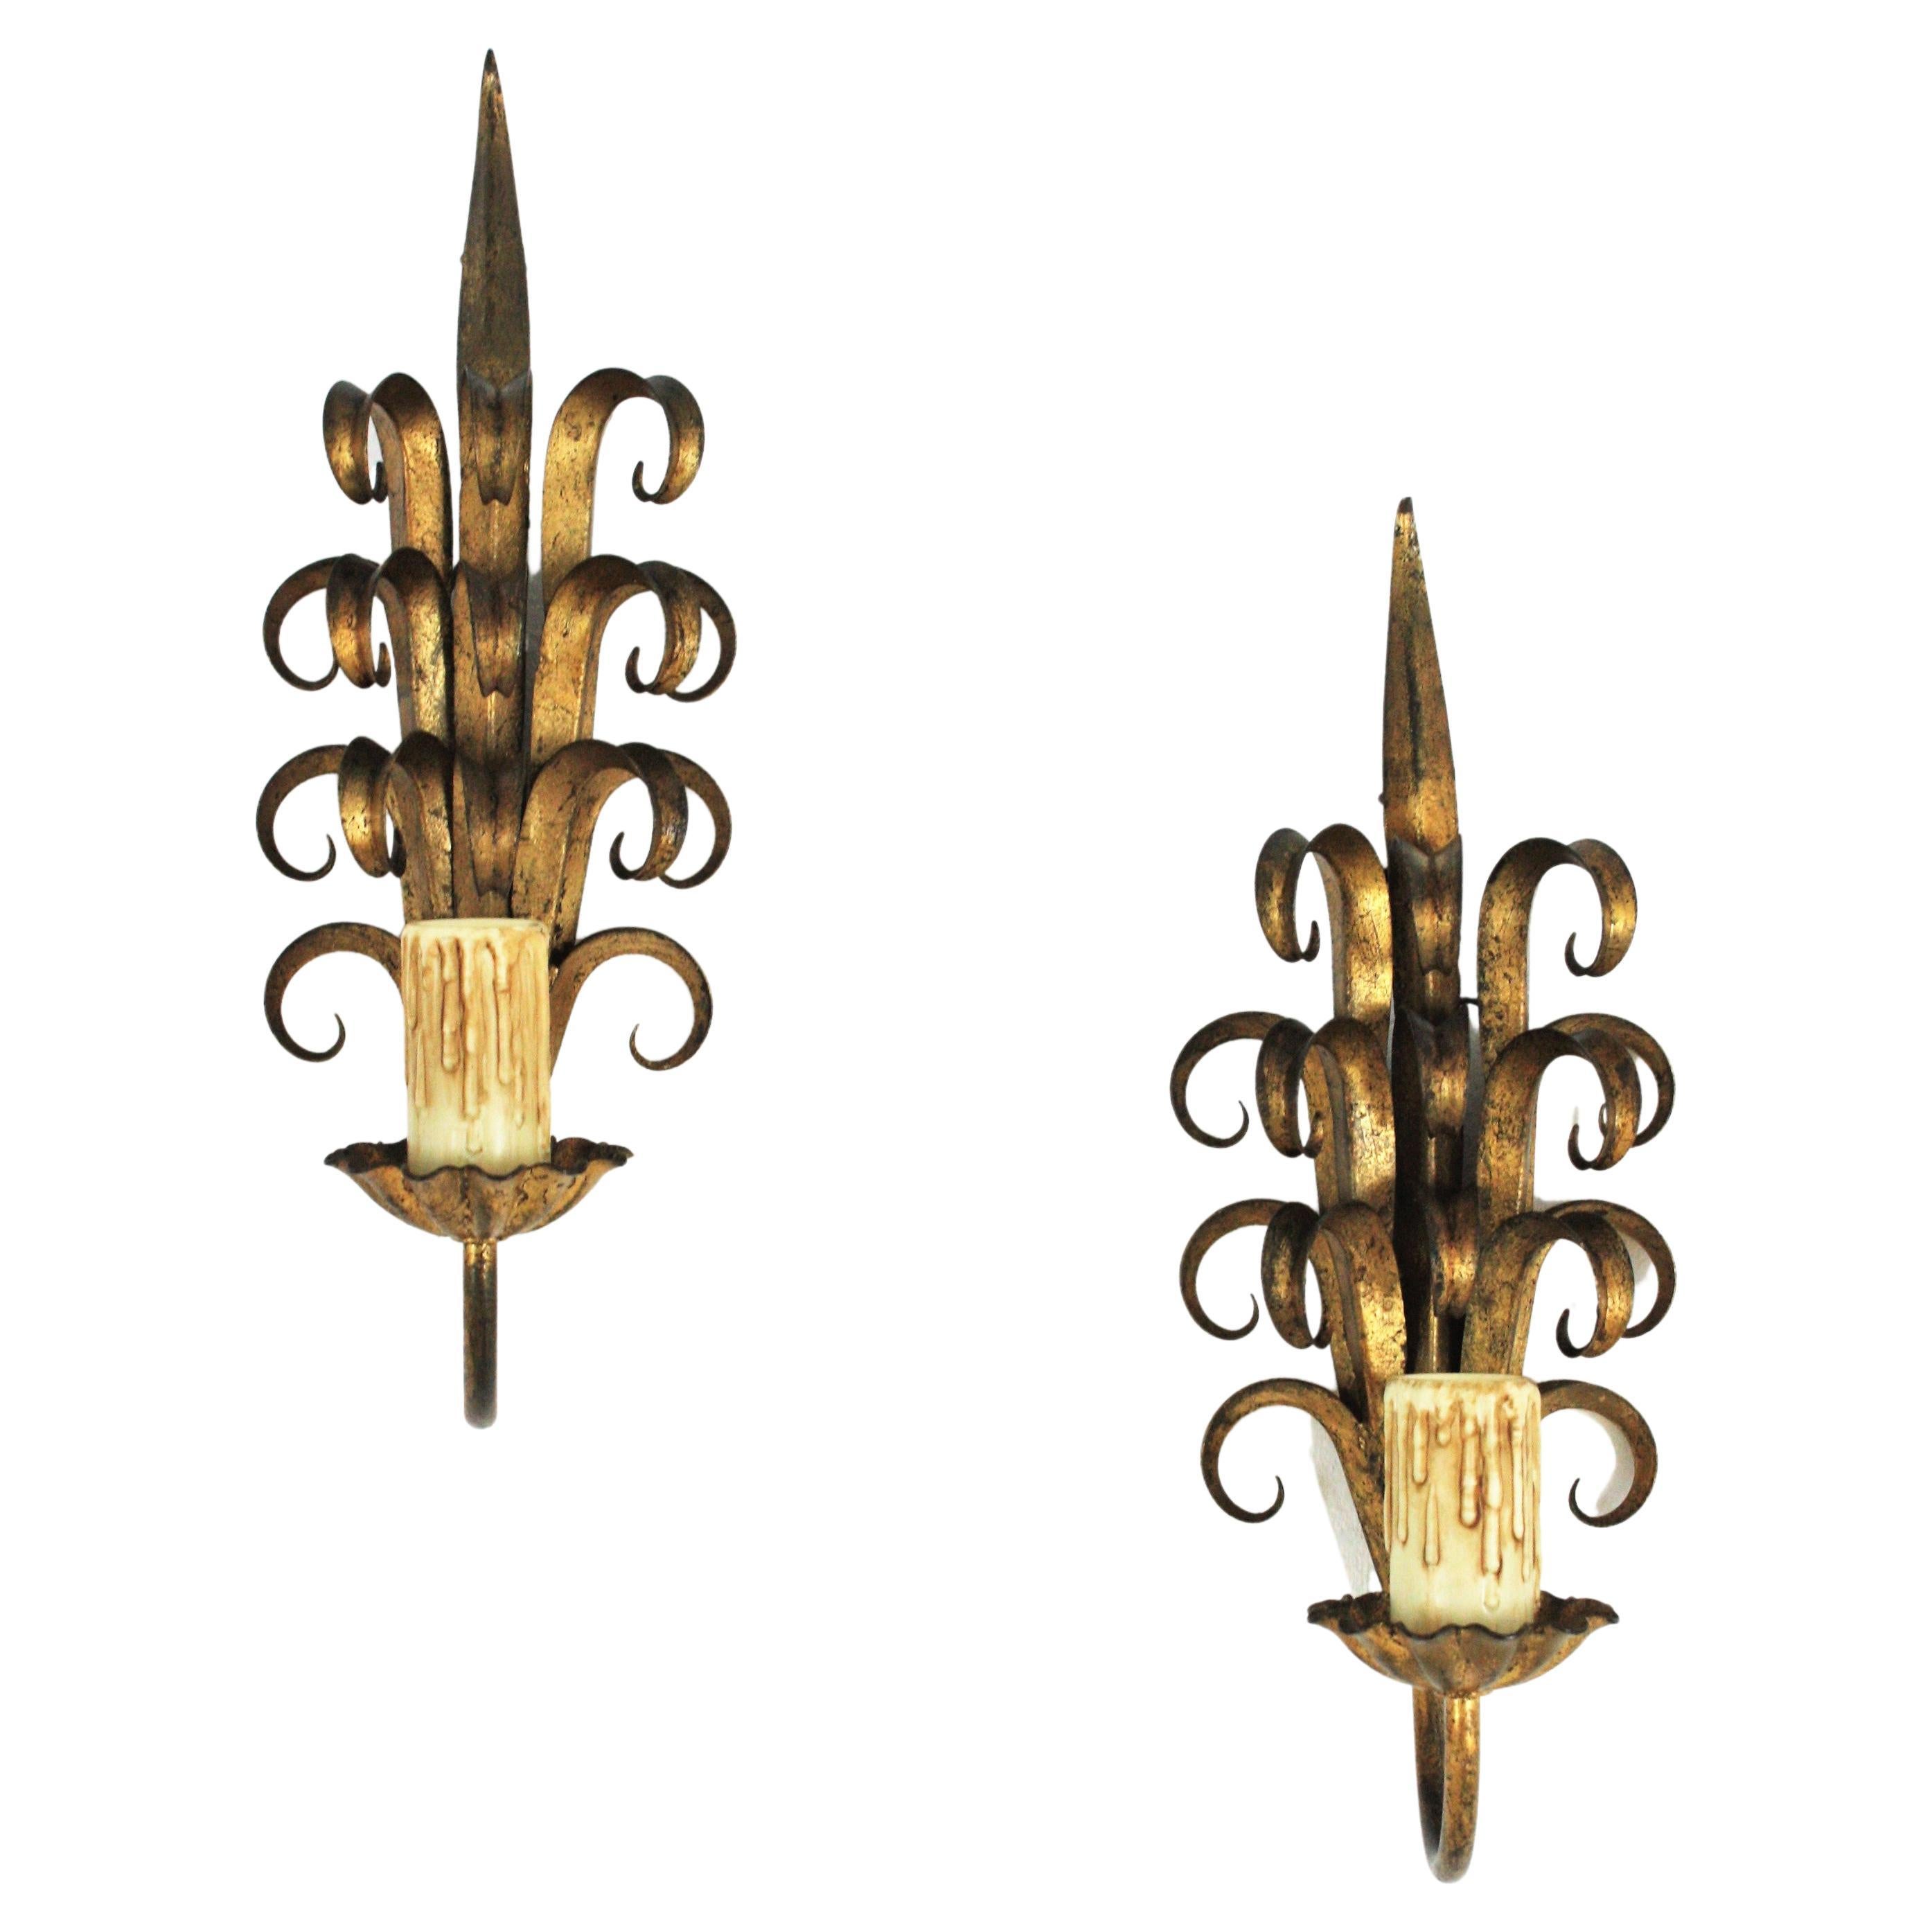 Pair of wall sconces in gilt iron, eyelash design. Spain, 1940s.
Hand-forged iron wall lights with five layers of iron pieces with scroll endings in eyelash shape. Gold leaf finish.
Candelabra bulb holders with candle covers.
Terrific aged patina